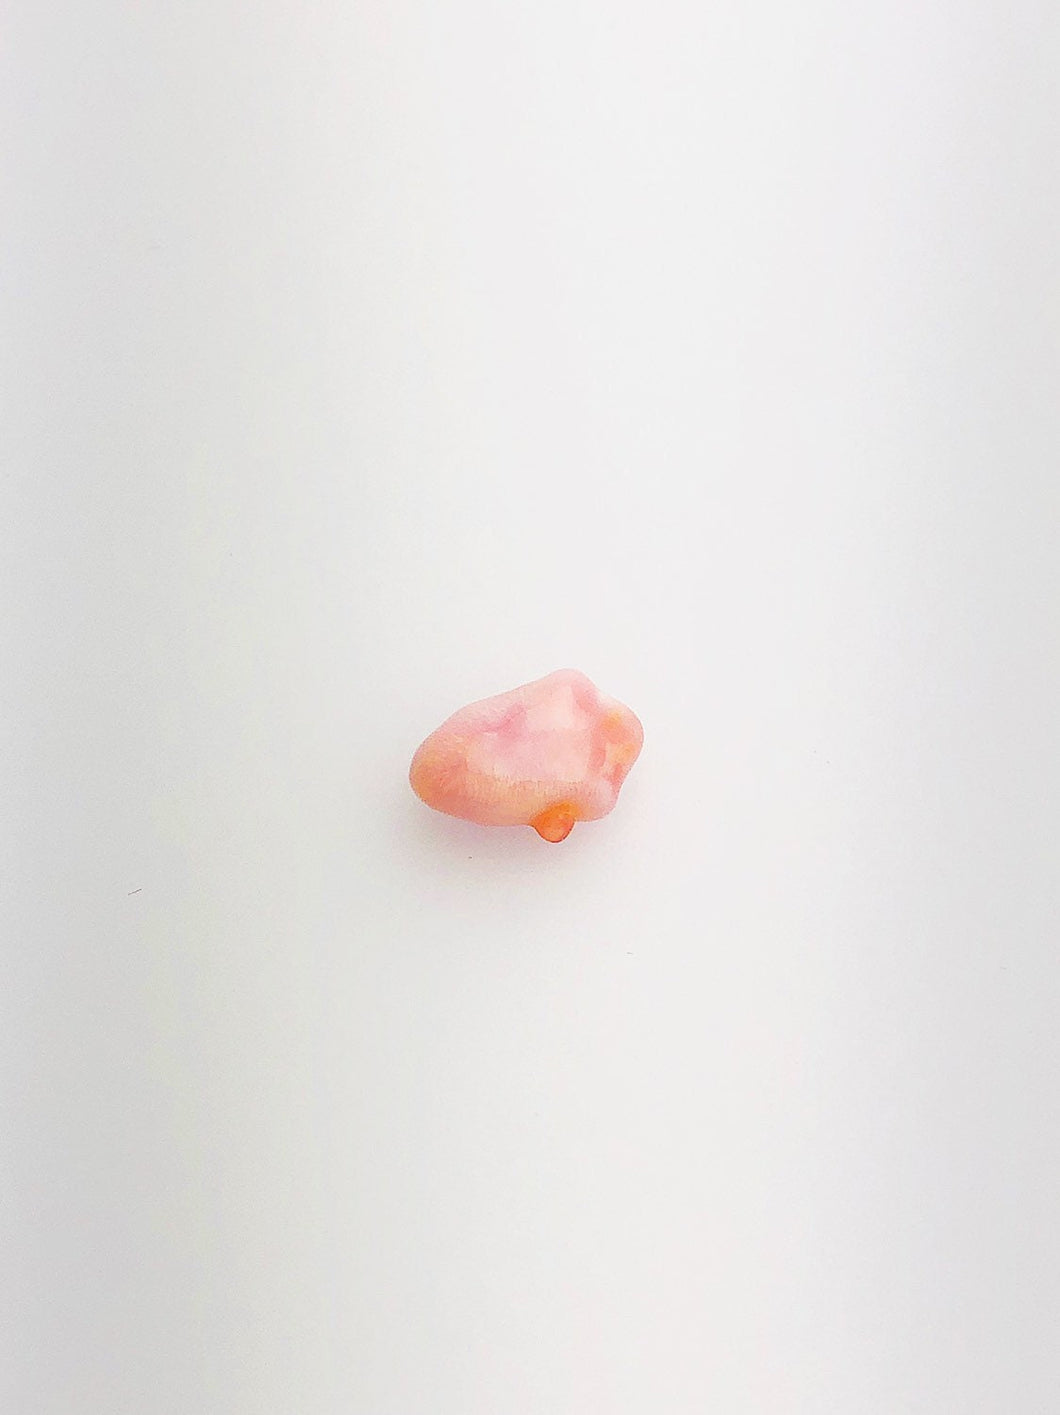 Conch Pearl Loose 8.9mm x 4.1mm No. 12